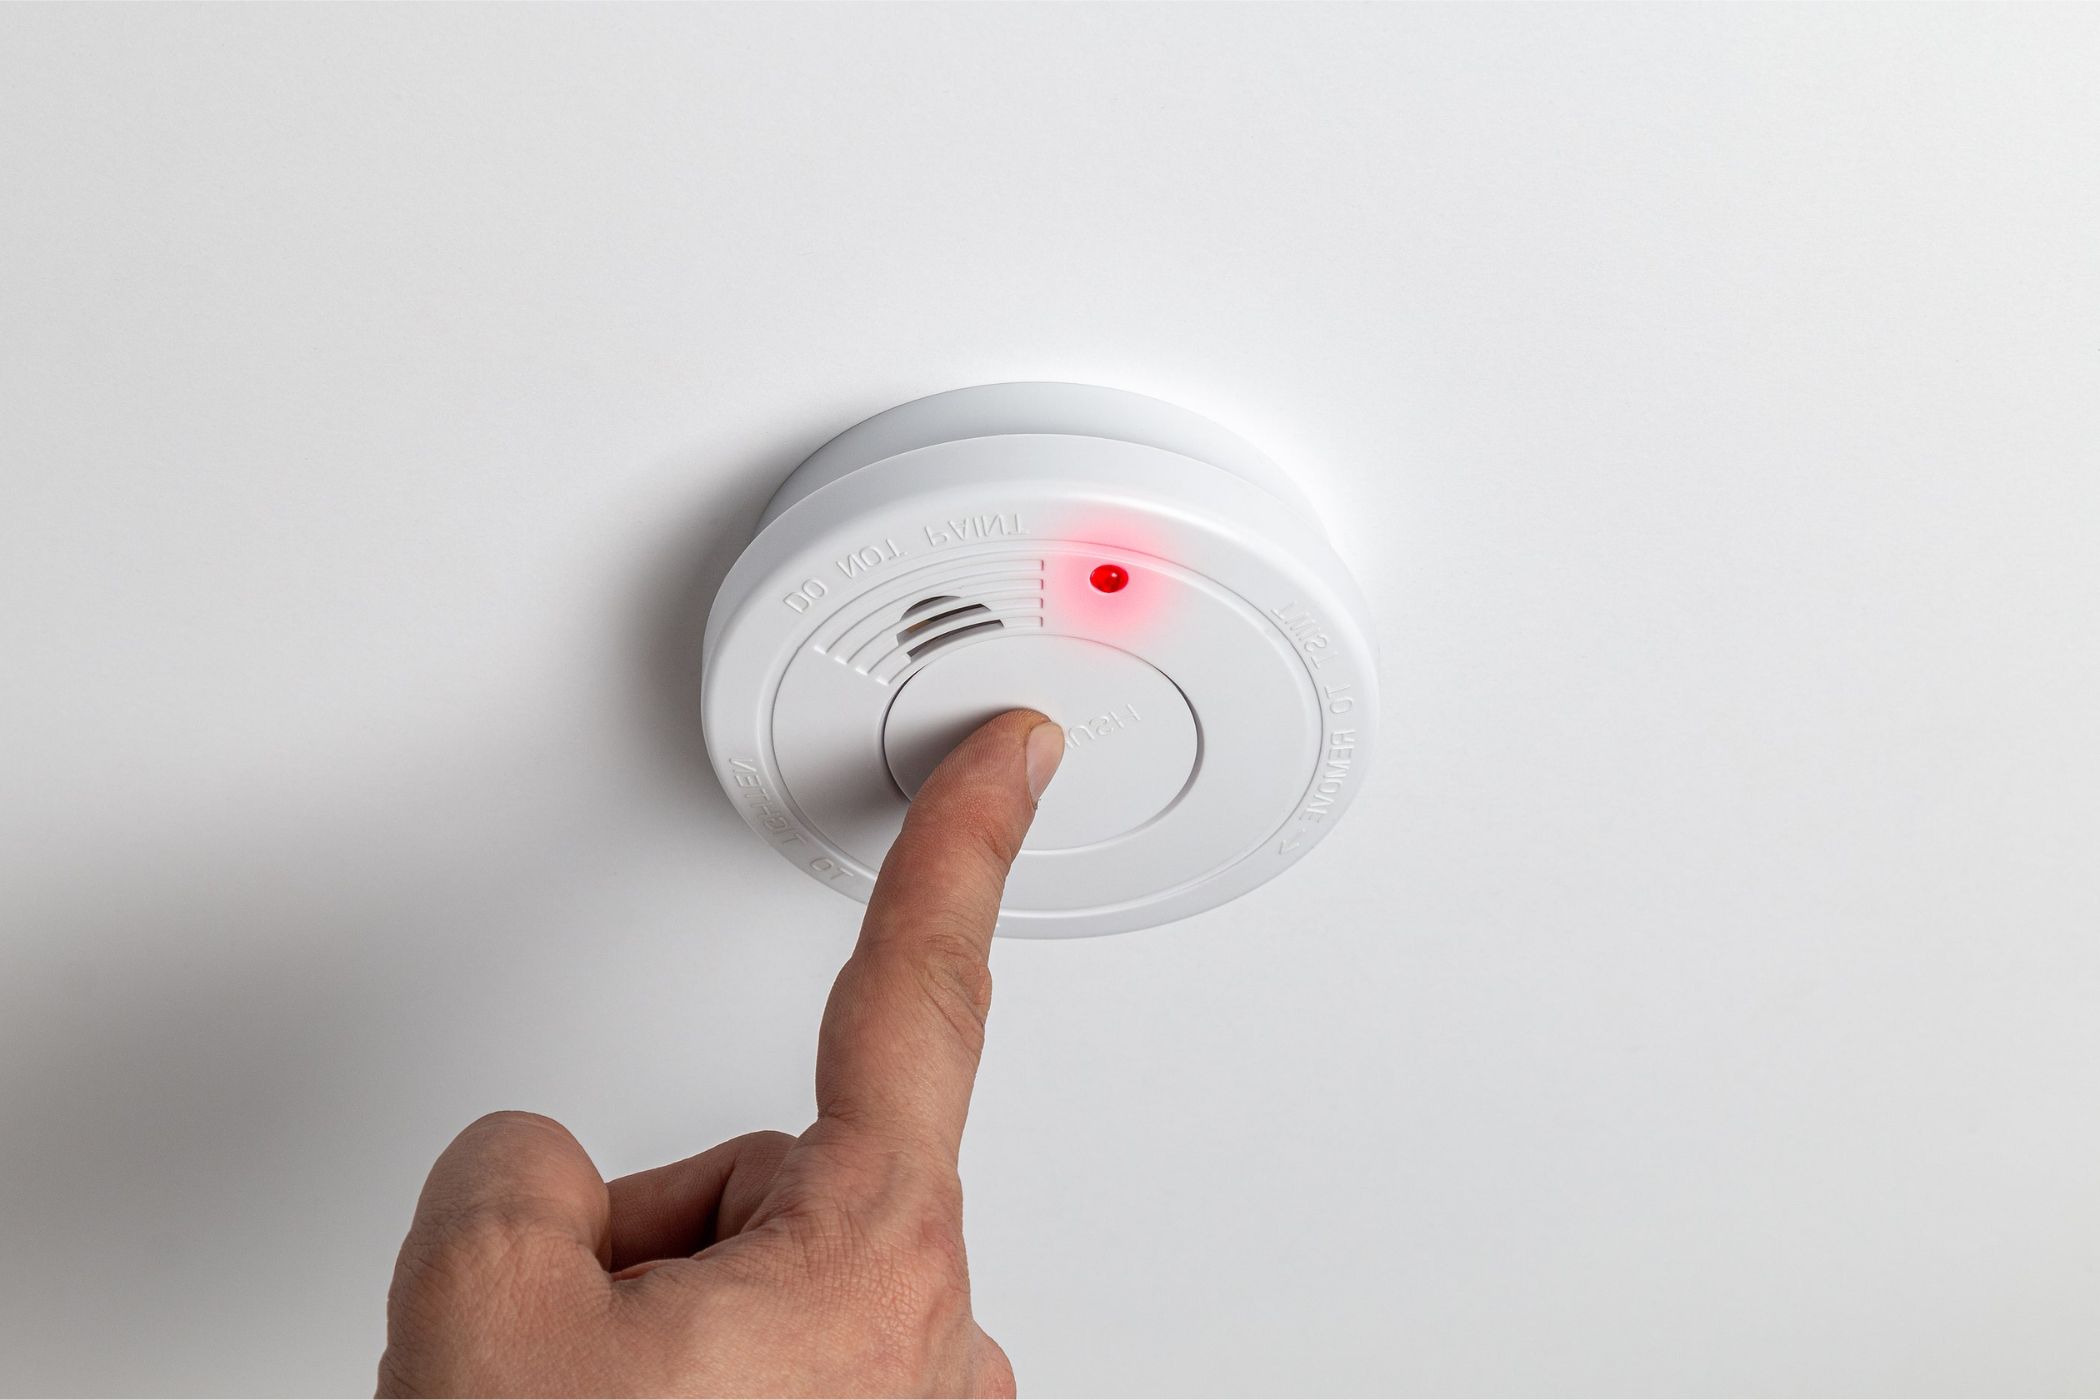 What Do 2 Beeps On A Smoke Detector Mean?